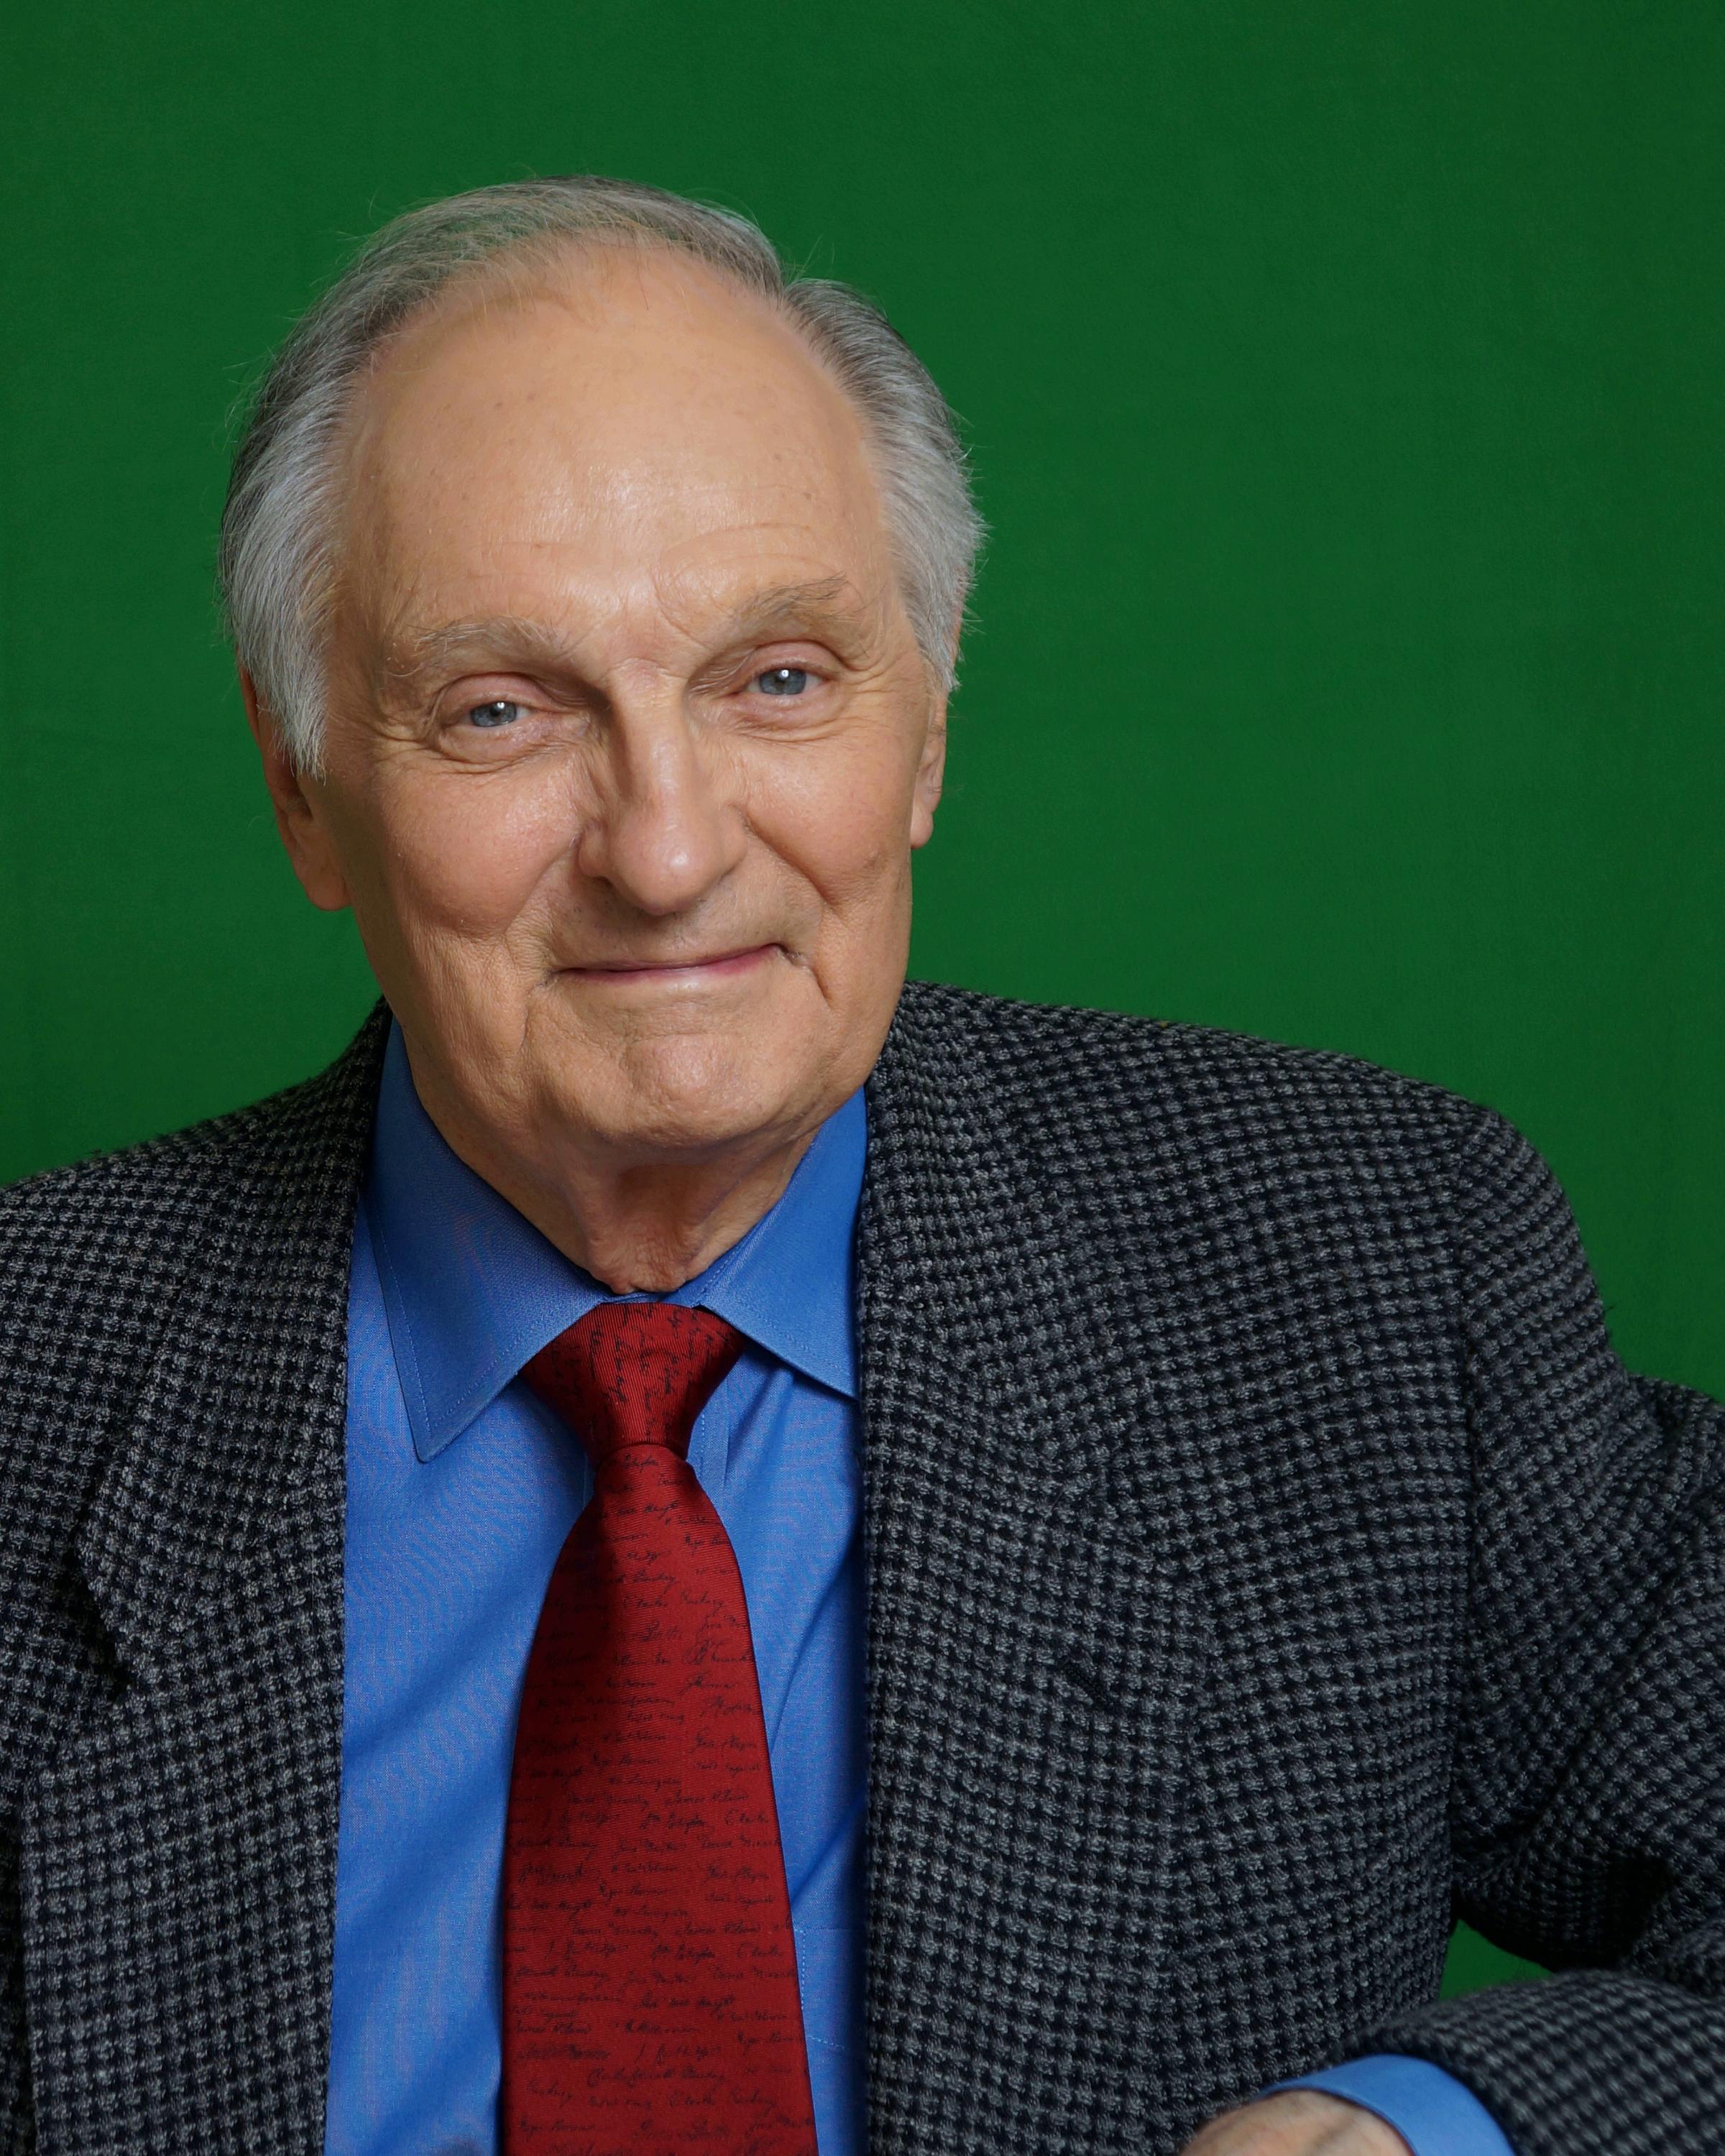 Alan Alda Gets Passive and Punchy with Etiquette | WUNC